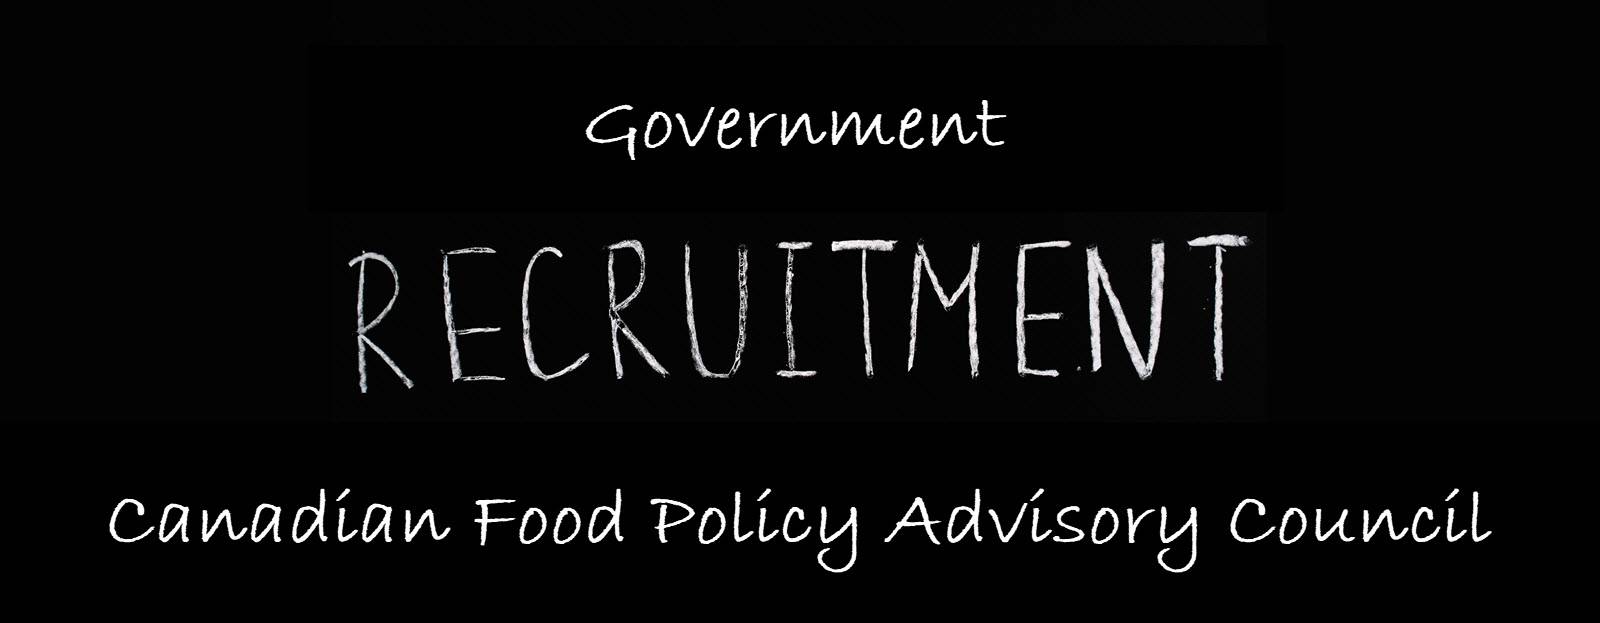 Banner for Government recruiting new members for Canadian Food Policy Advisory Council